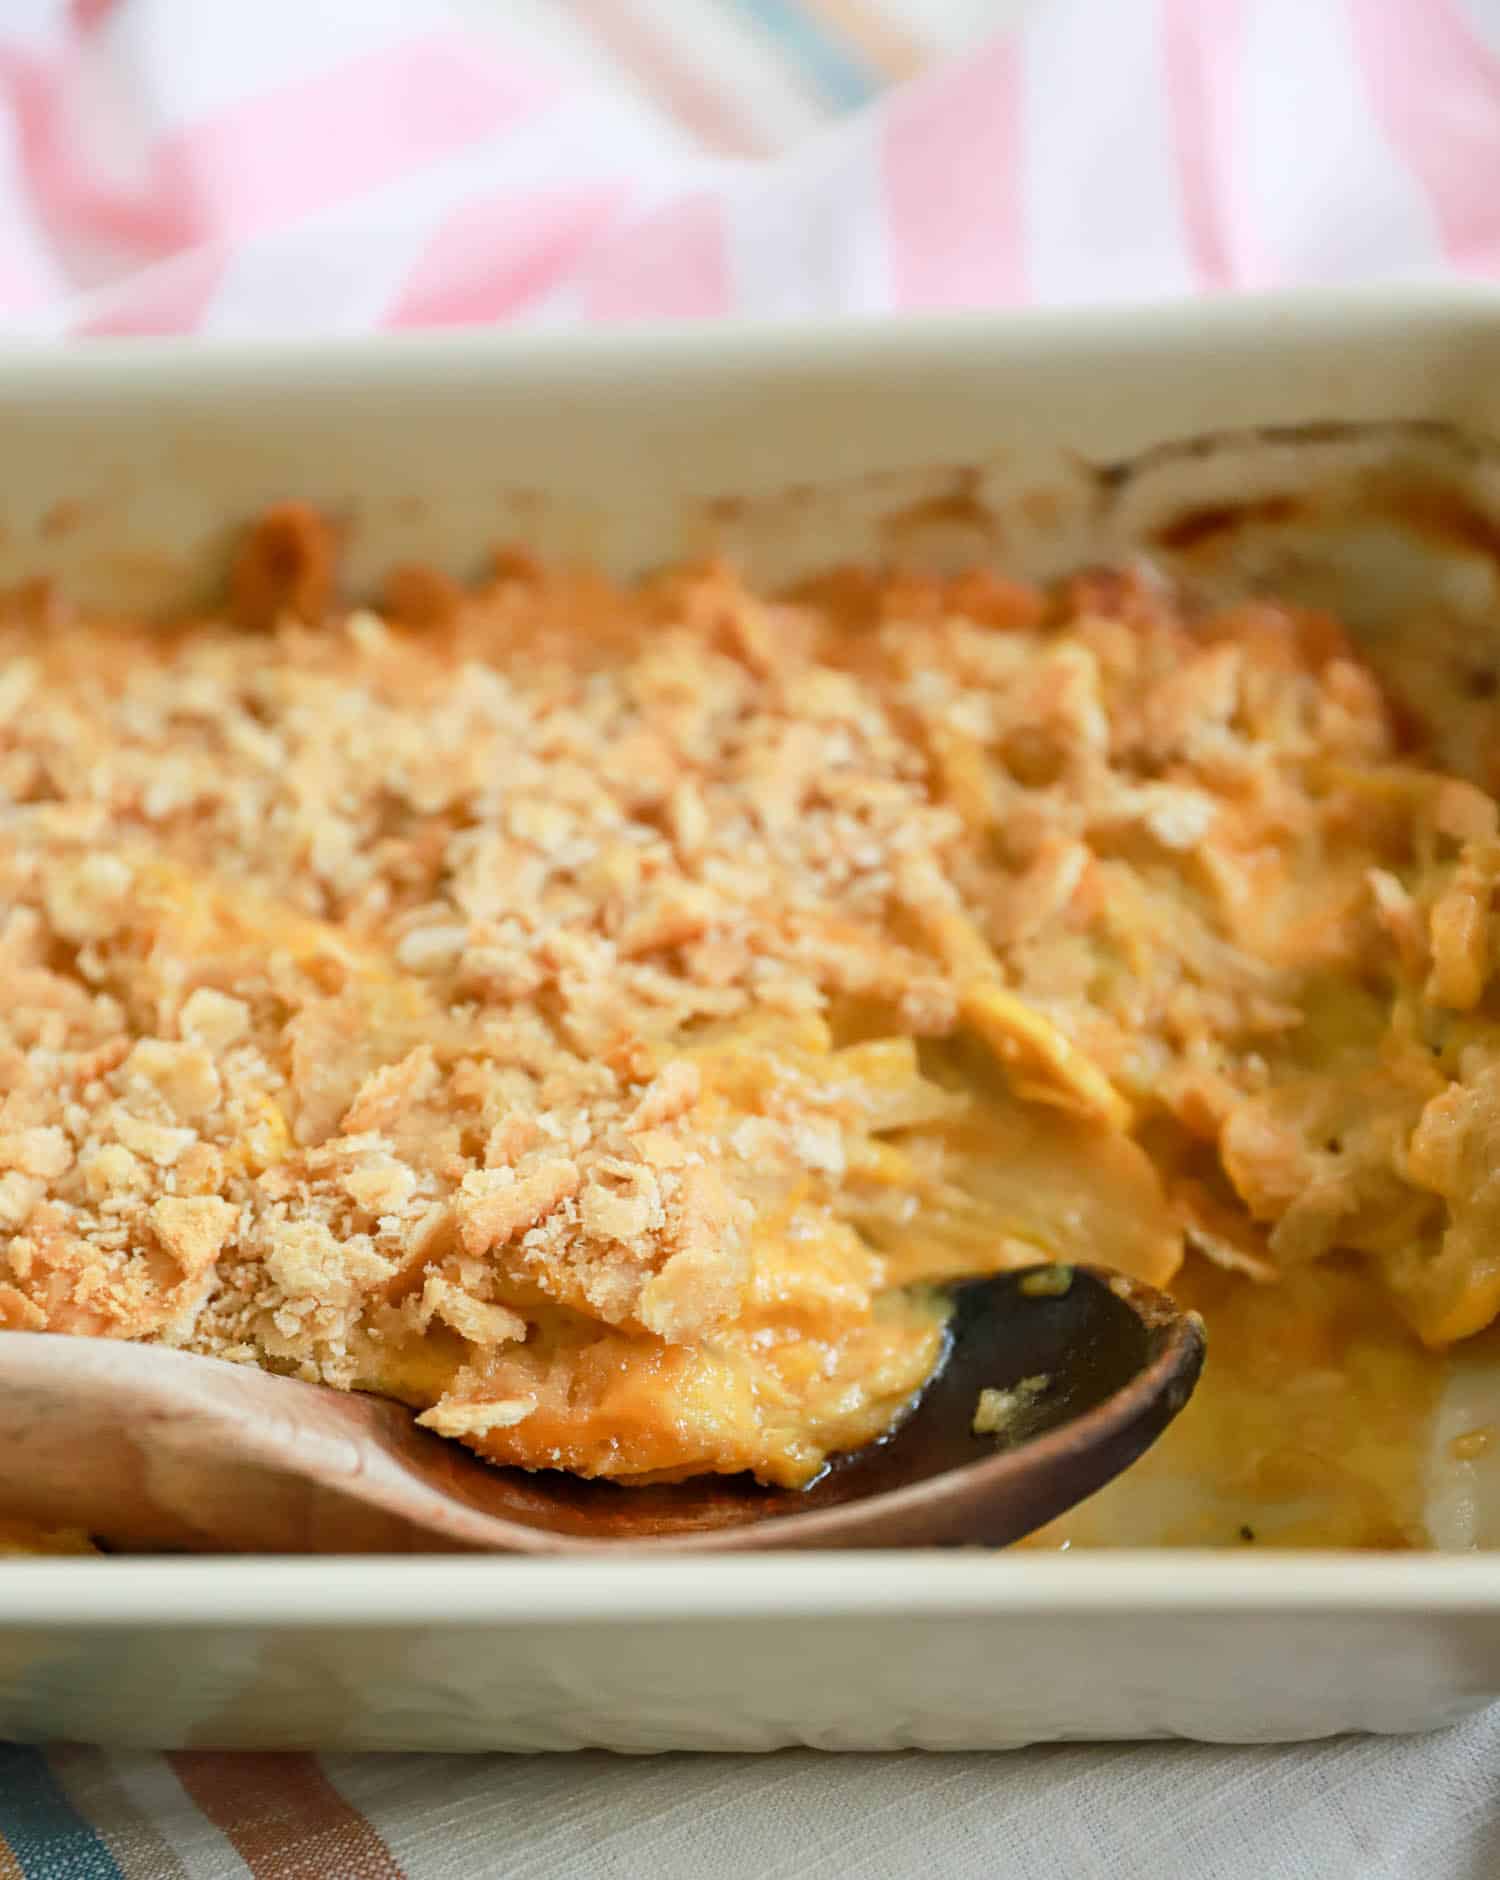 Side view of squash casserole with wooden spoon.